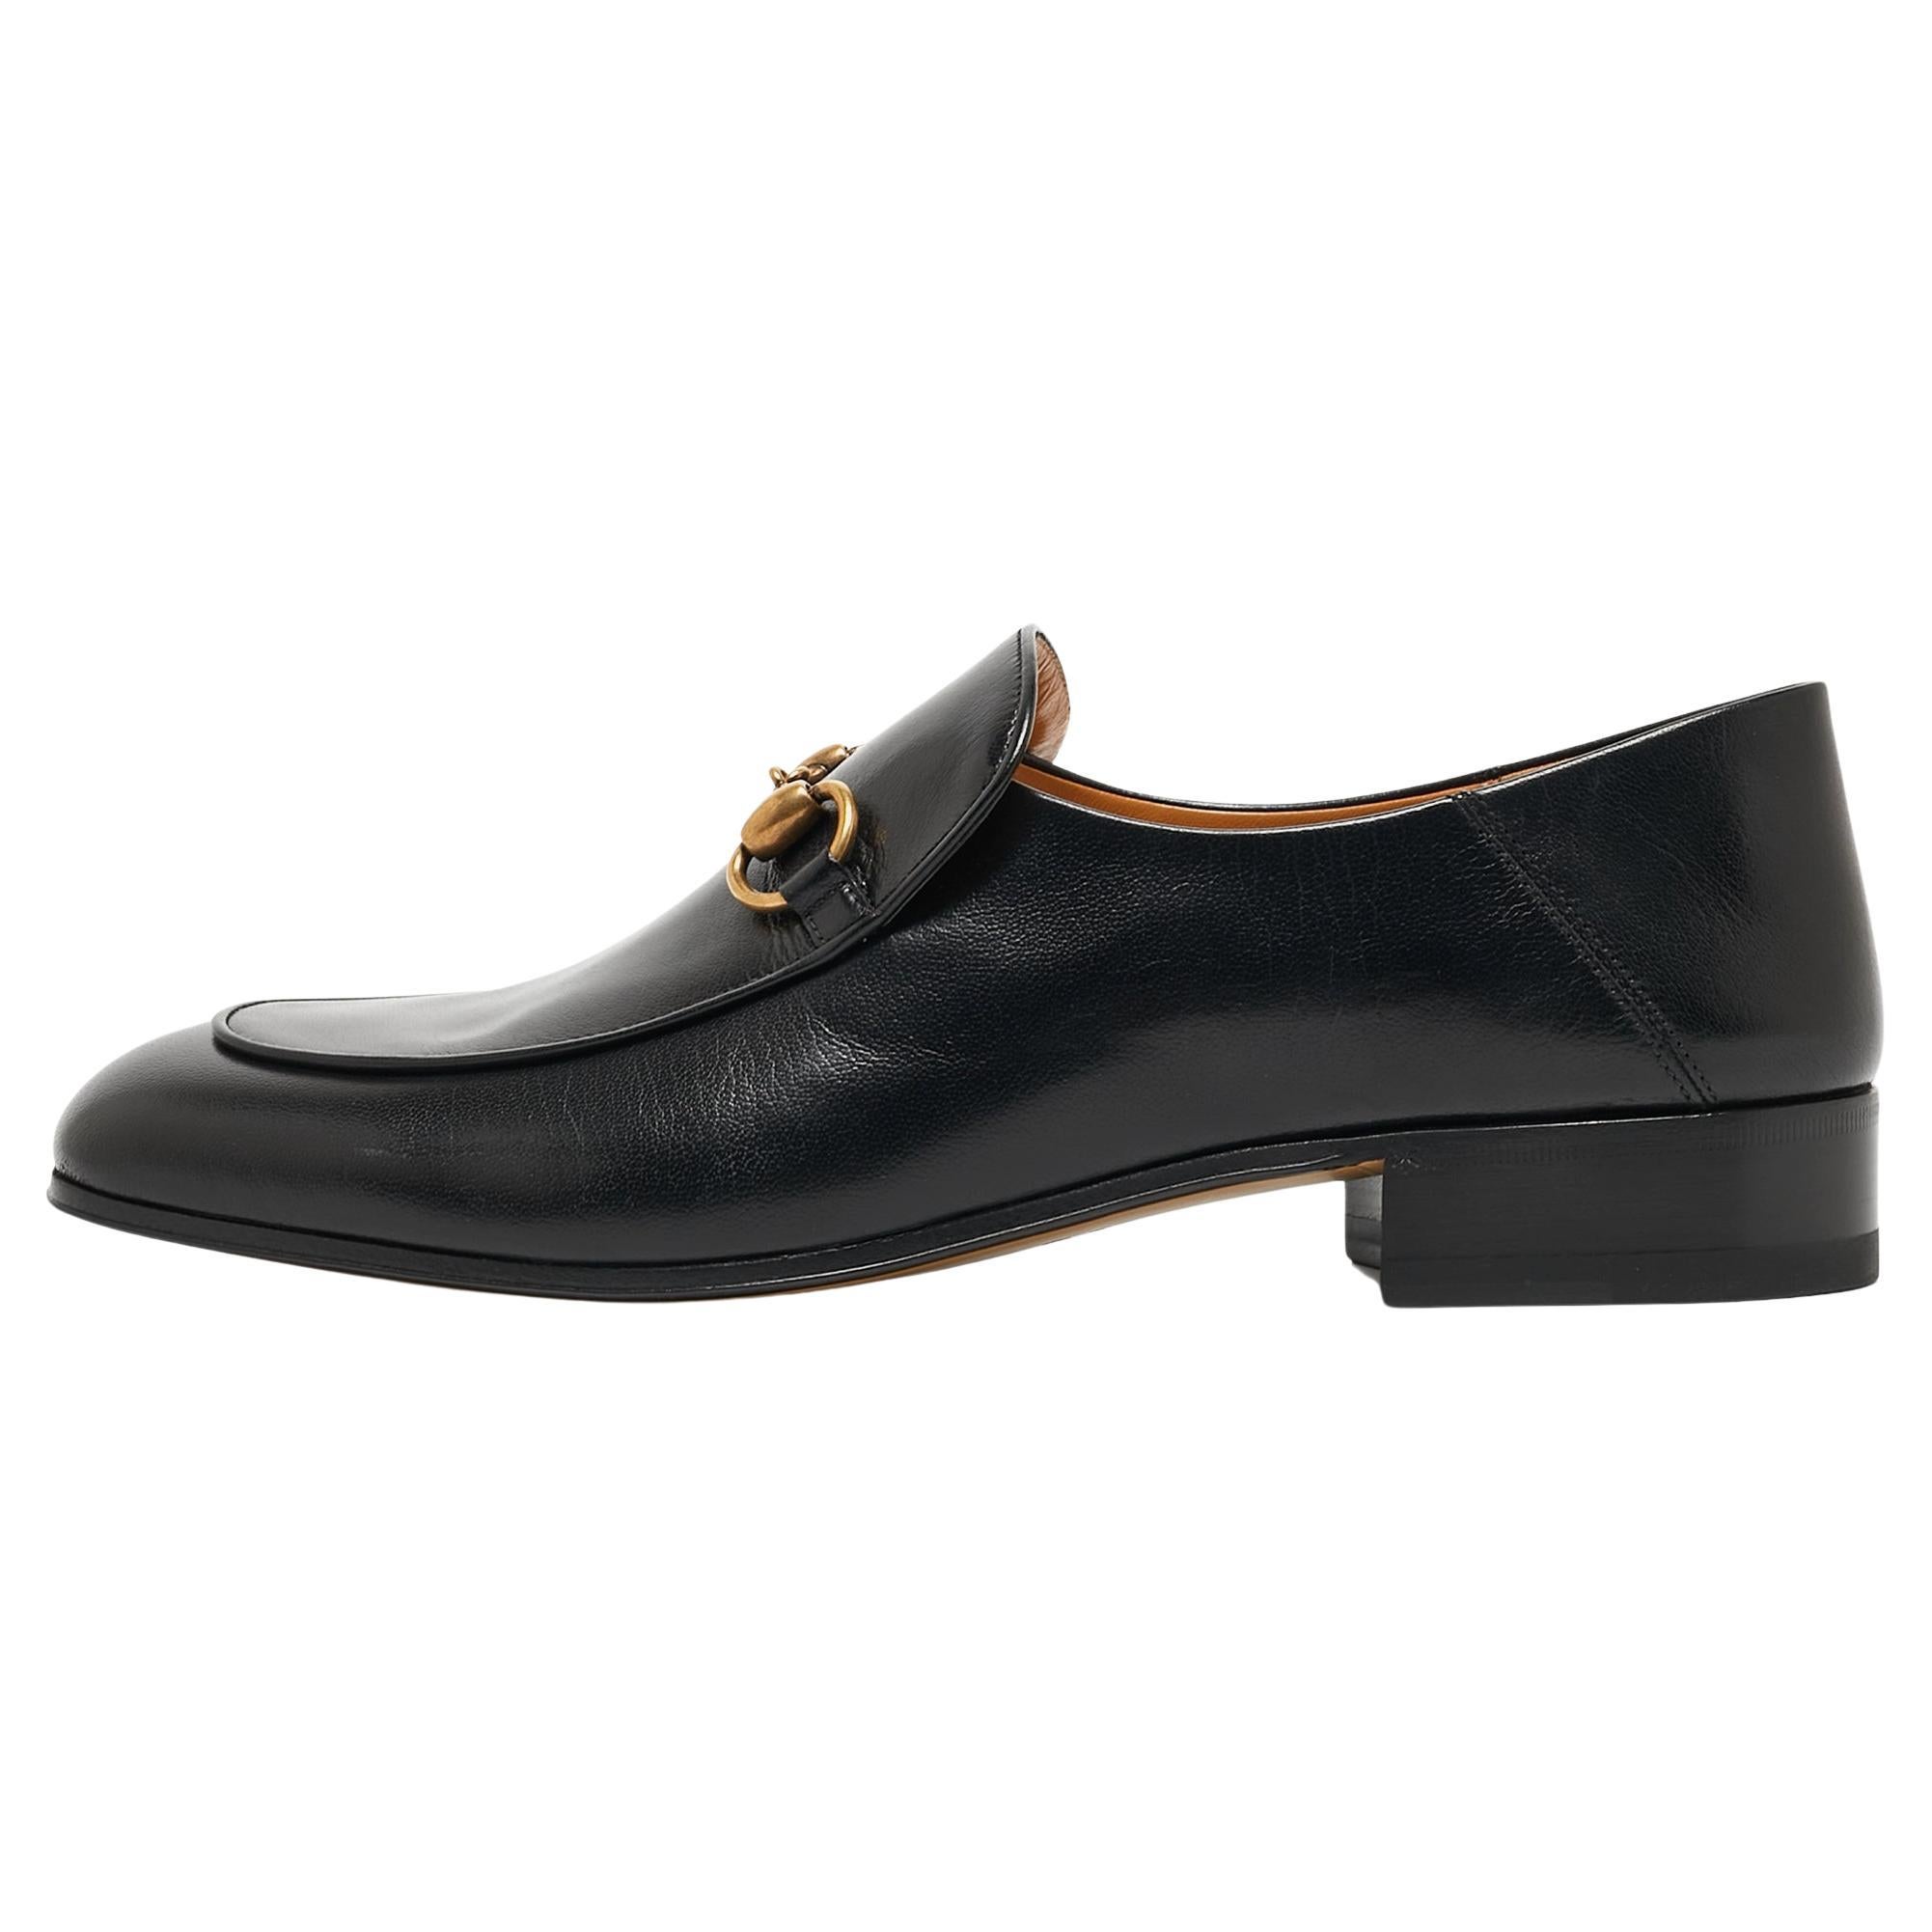 Gucci Black Leather Horsebit Slip On Loafers Size 42